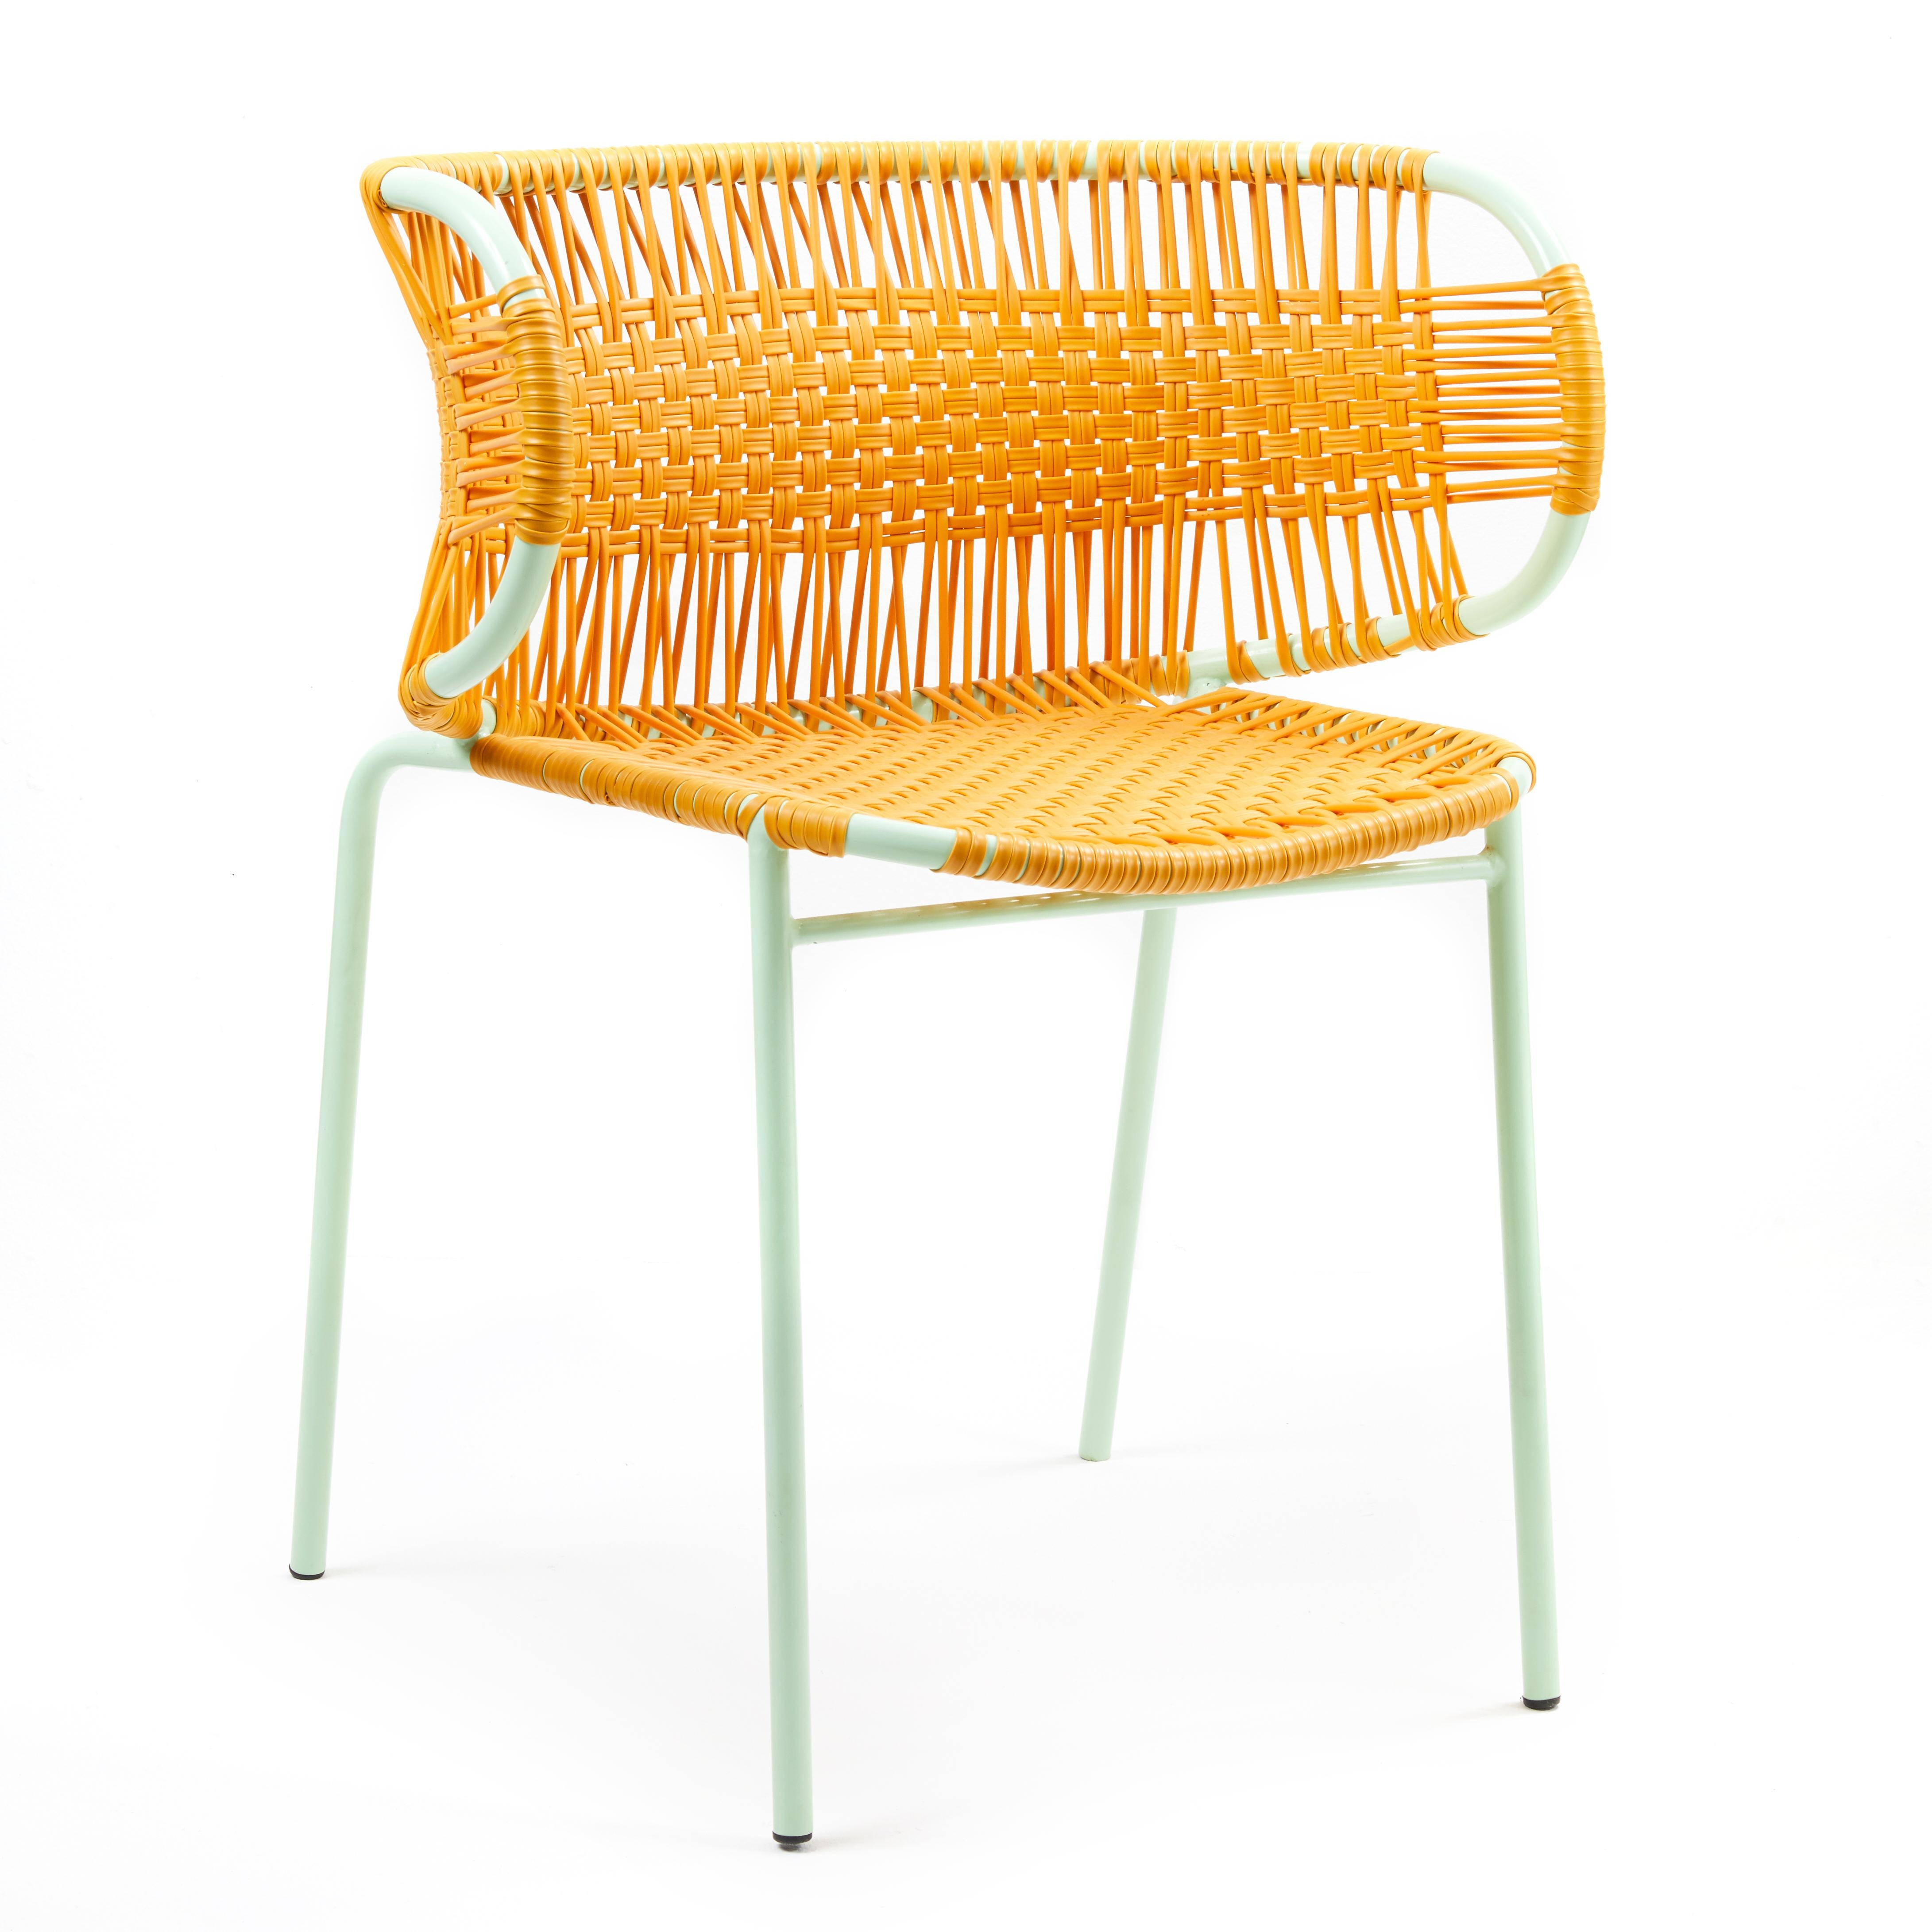 Set of 2 Honey Cielo stacking chair with armrest by Sebastian Herkner
Materials: Galvanized and powder-coated tubular steel. PVC strings are made from recycled plastic.
Technique: Made from recycled plastic and weaved by local craftspeople in